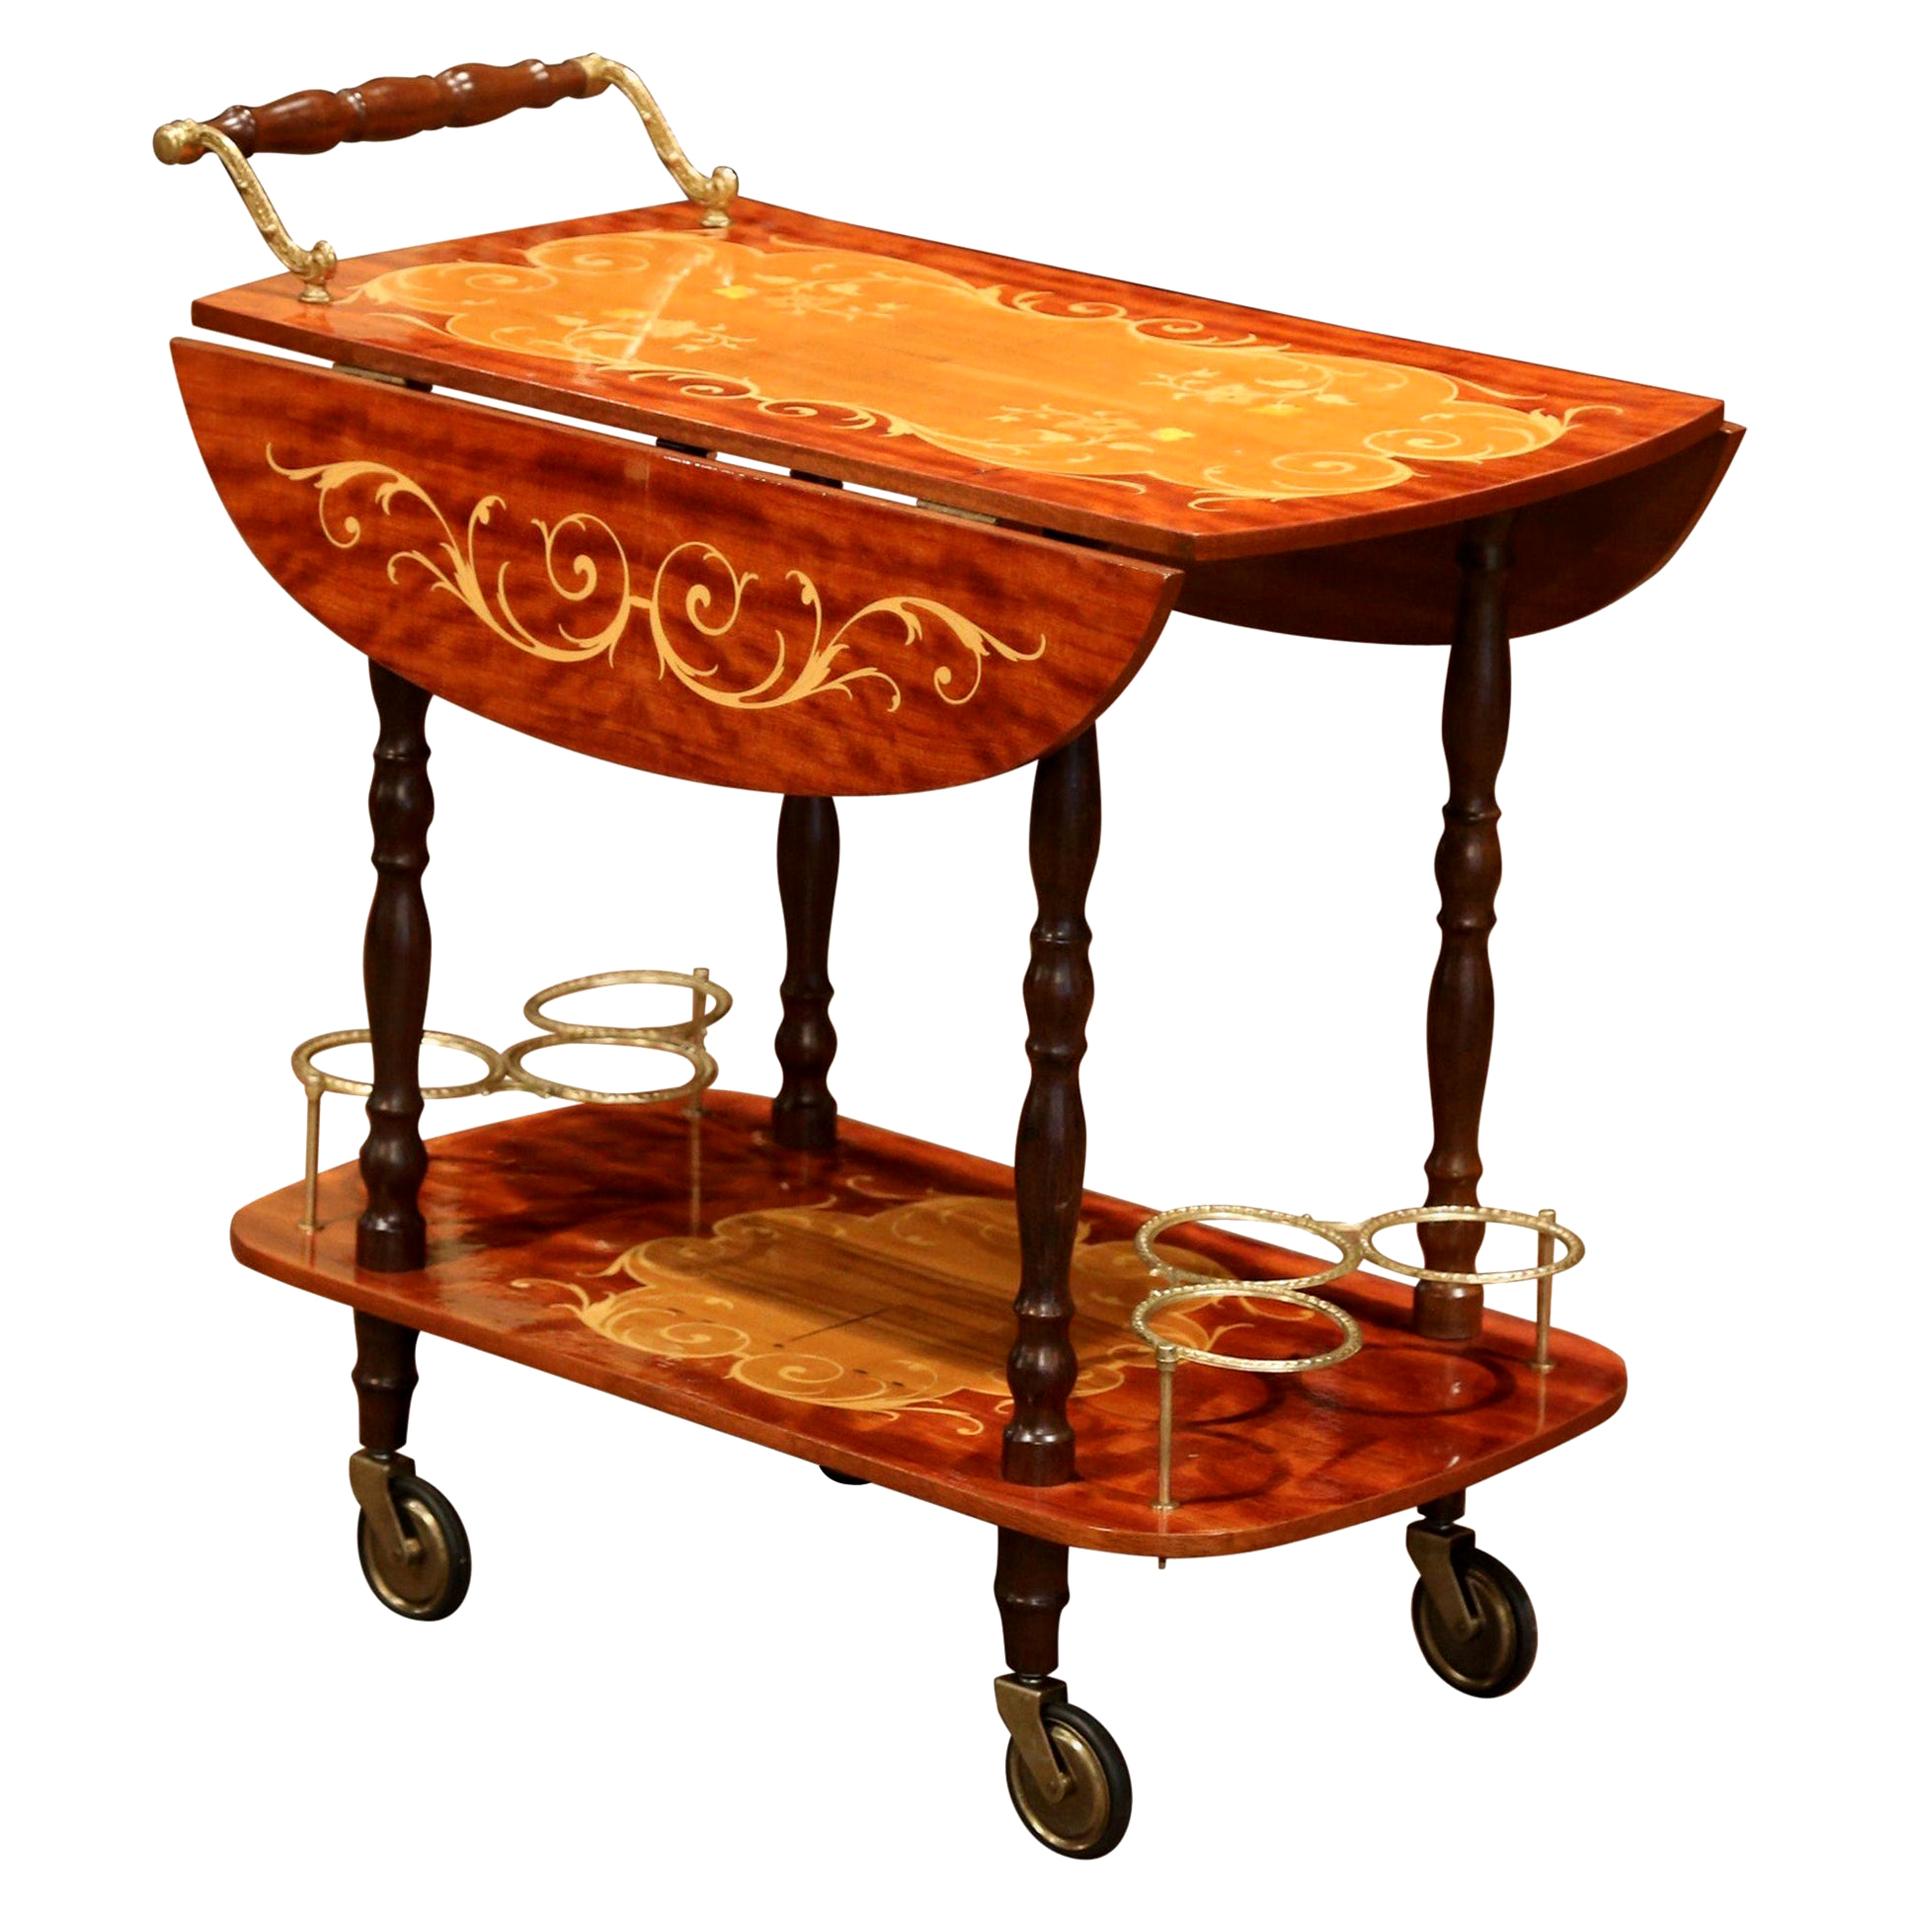 Late 20th Century French Rosewood and Brass Drop-Leaf Tea Cart with Marquetry